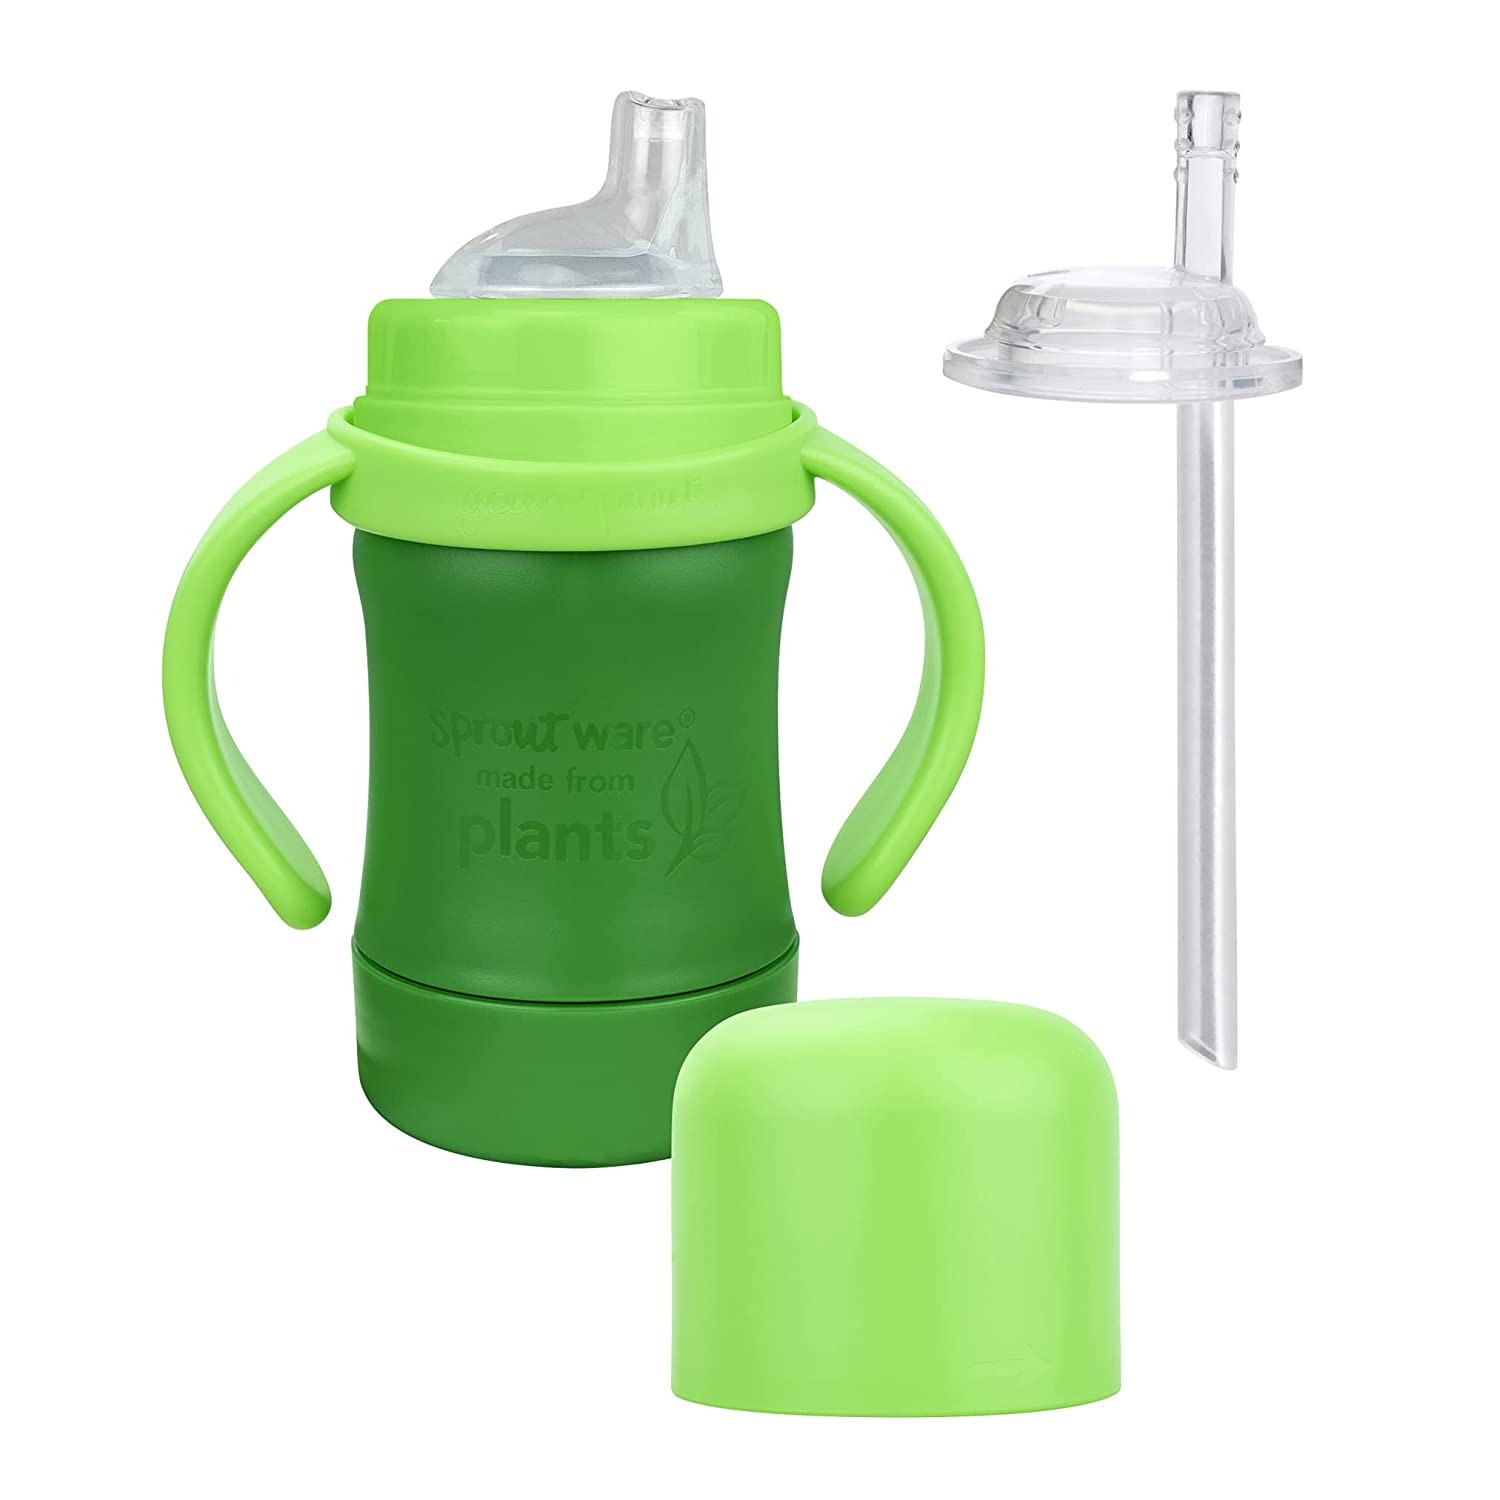 IPlay Sprout Ware Sip & Straw Cup - Green